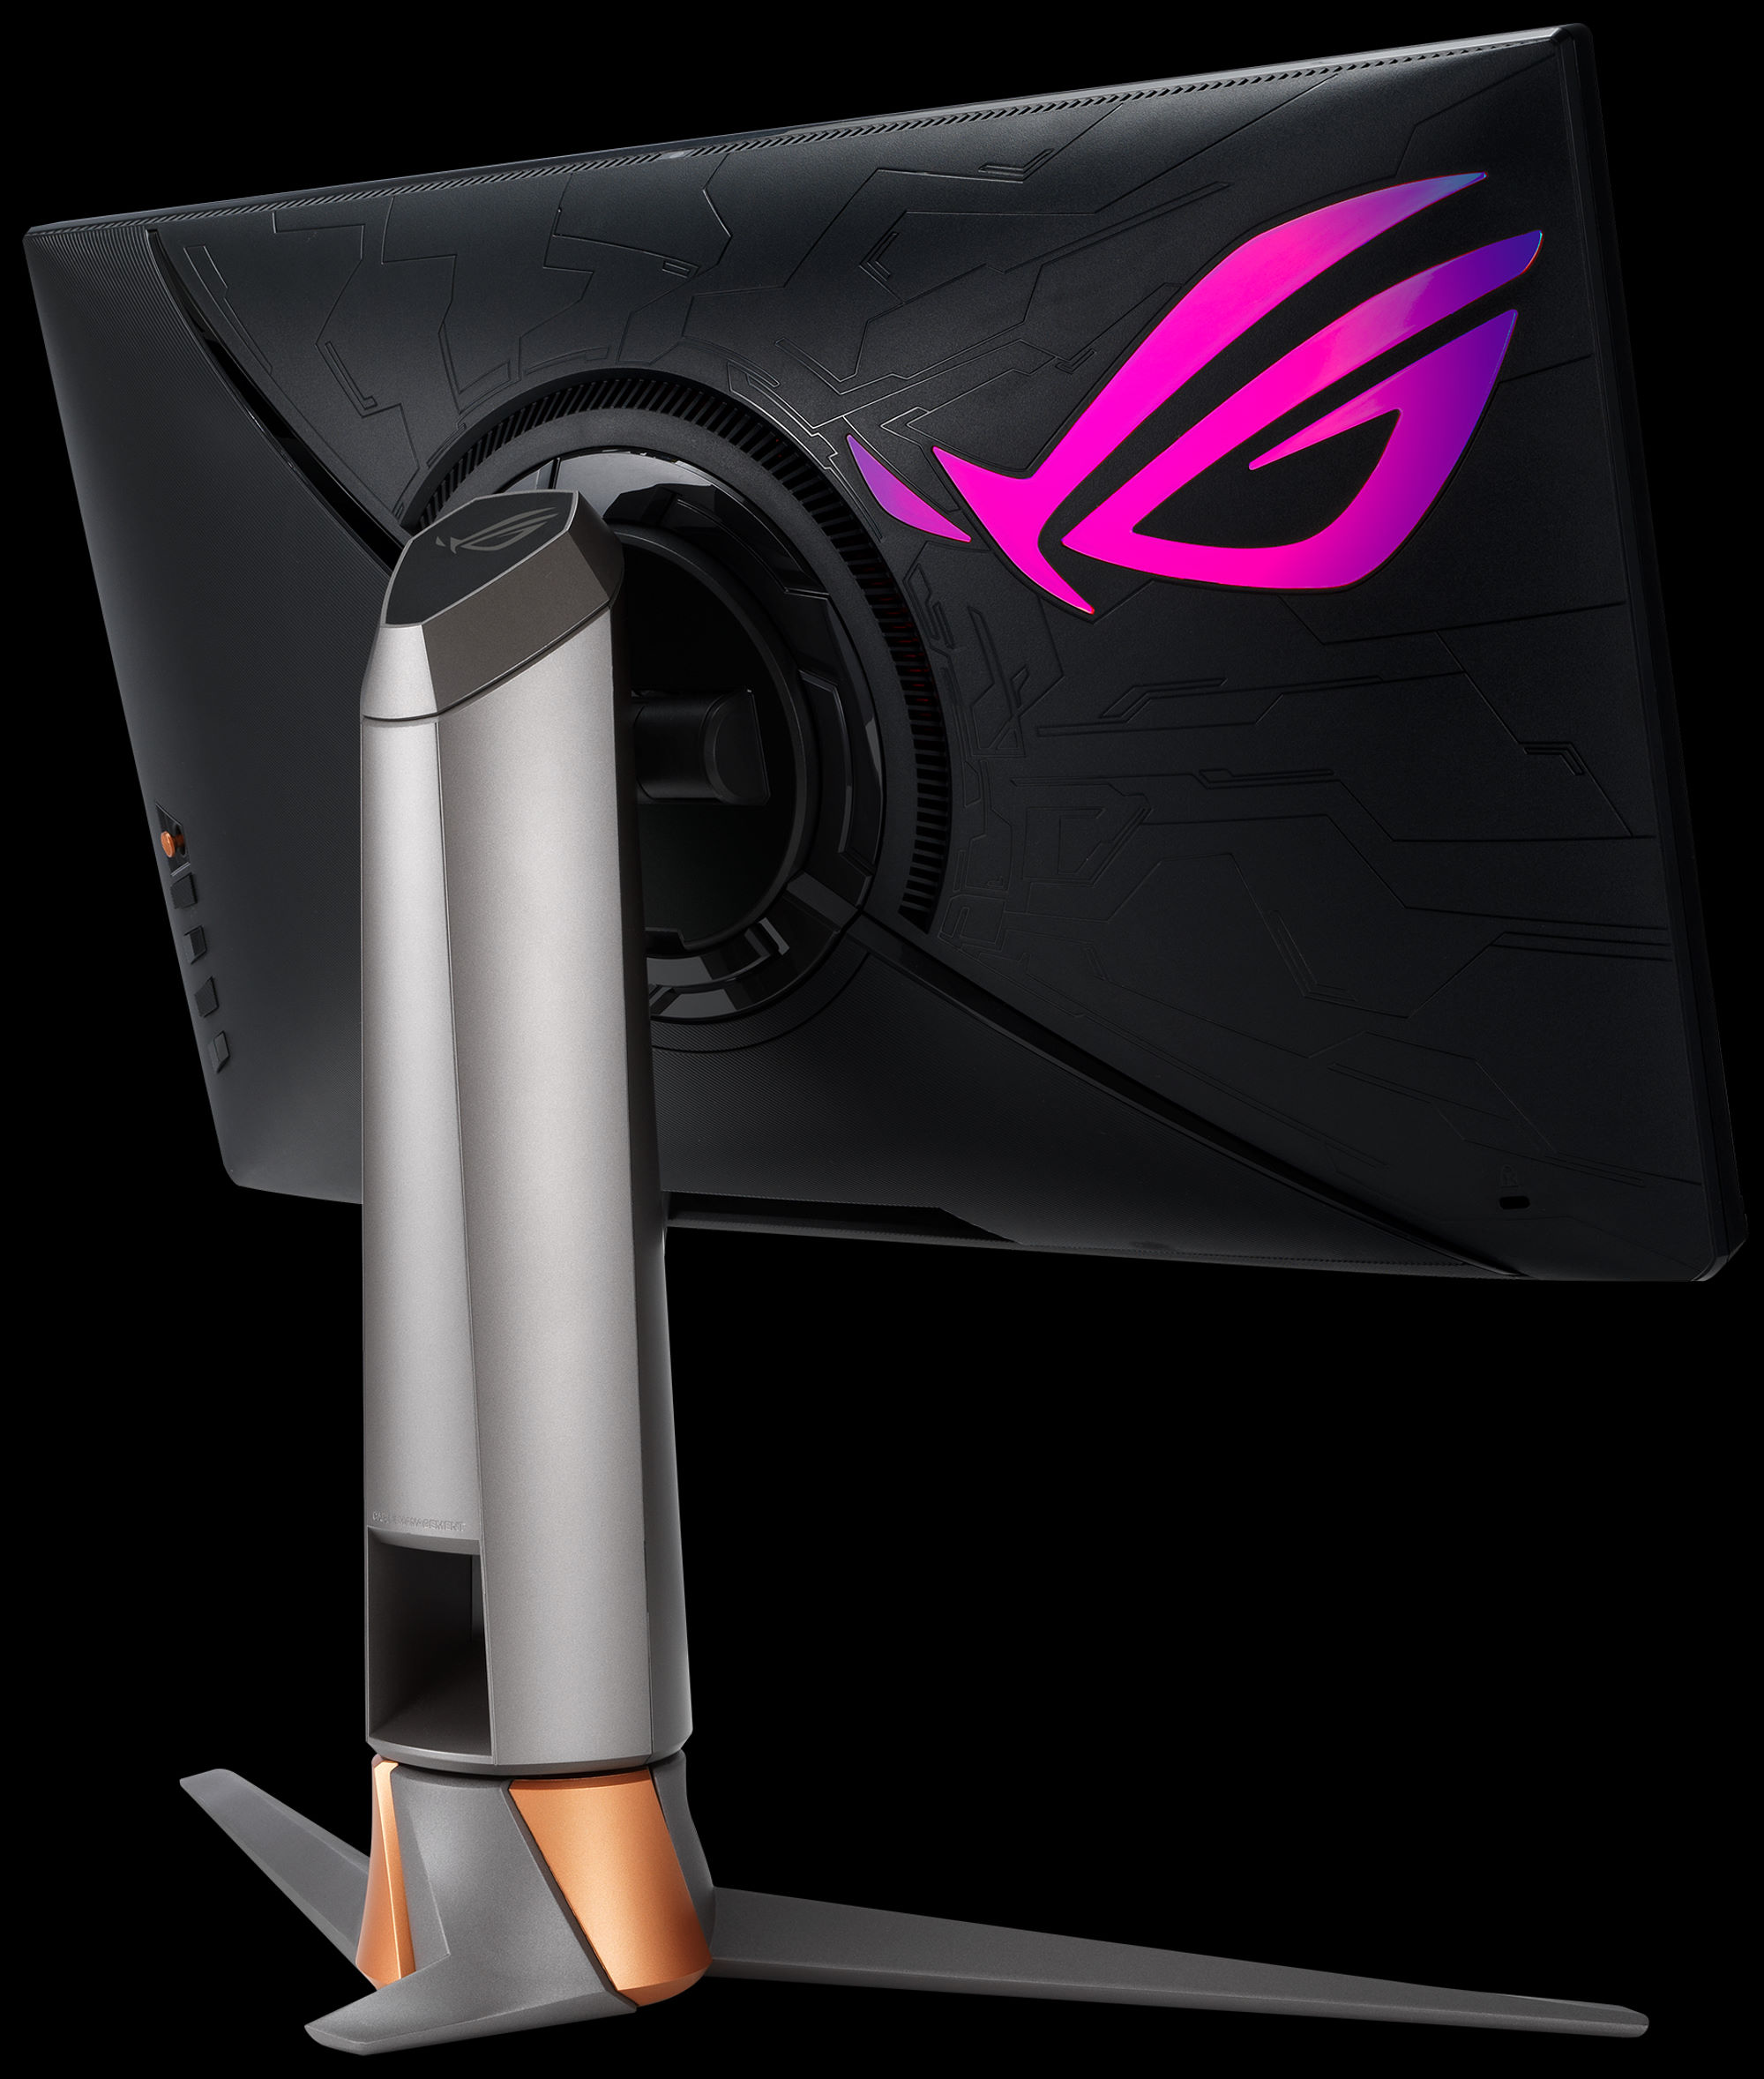 ROG Swift 360Hz: Asus teamed up with Nvidia to develop the world's fastest  monitor - CNET